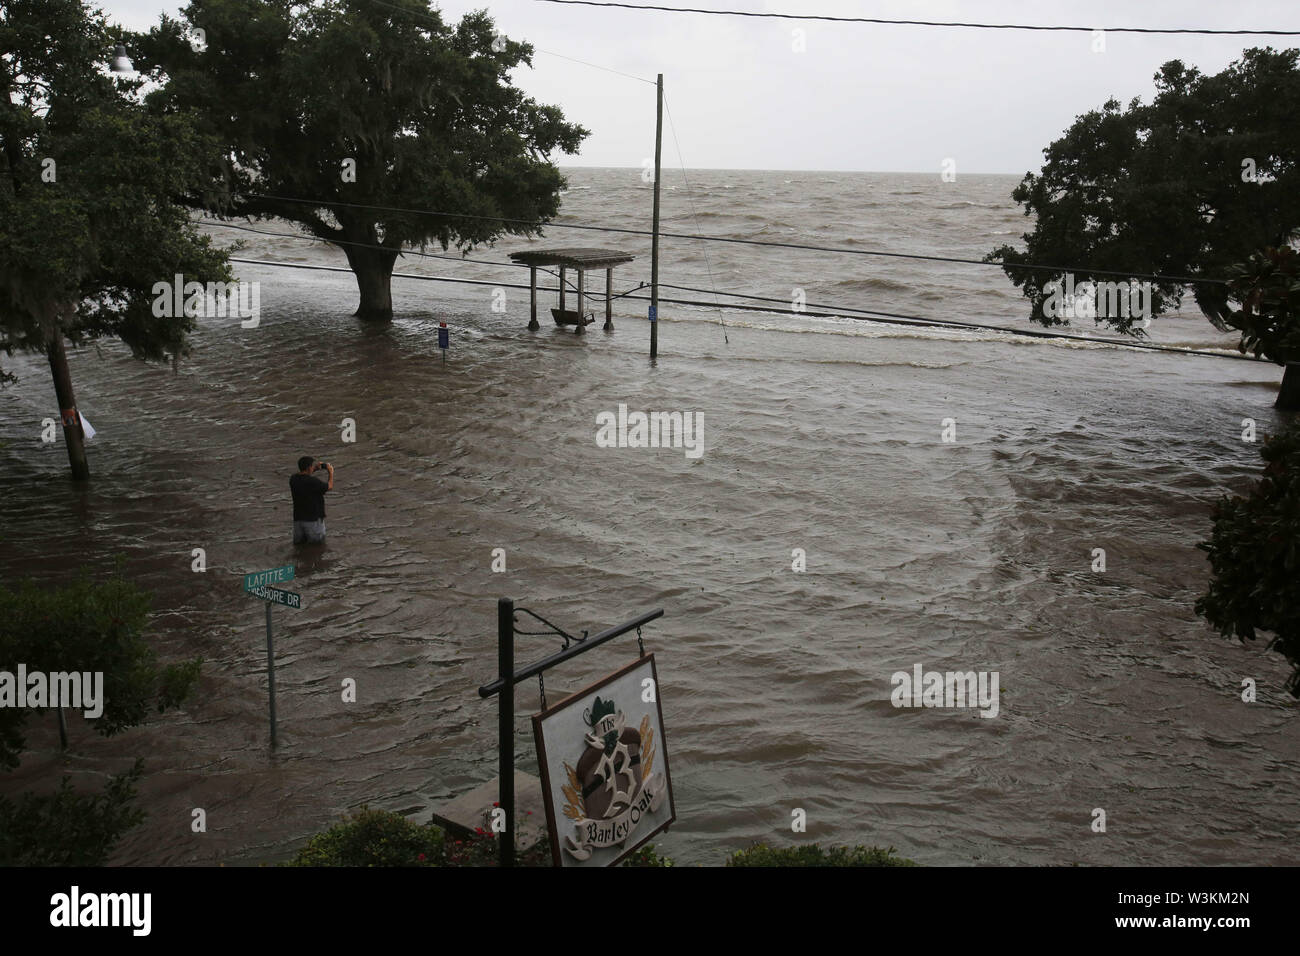 July 13, 2019 - Mandeville, LOUISIANA, U.S - Chris Ladner looks out at a flooded area next to Lake Pontchartrain in Mandeville, Louisiana USA as Hurricane Barry makes landfall on July 13, 2019. (Credit Image: © Dan Anderson/ZUMA Wire) Stock Photo